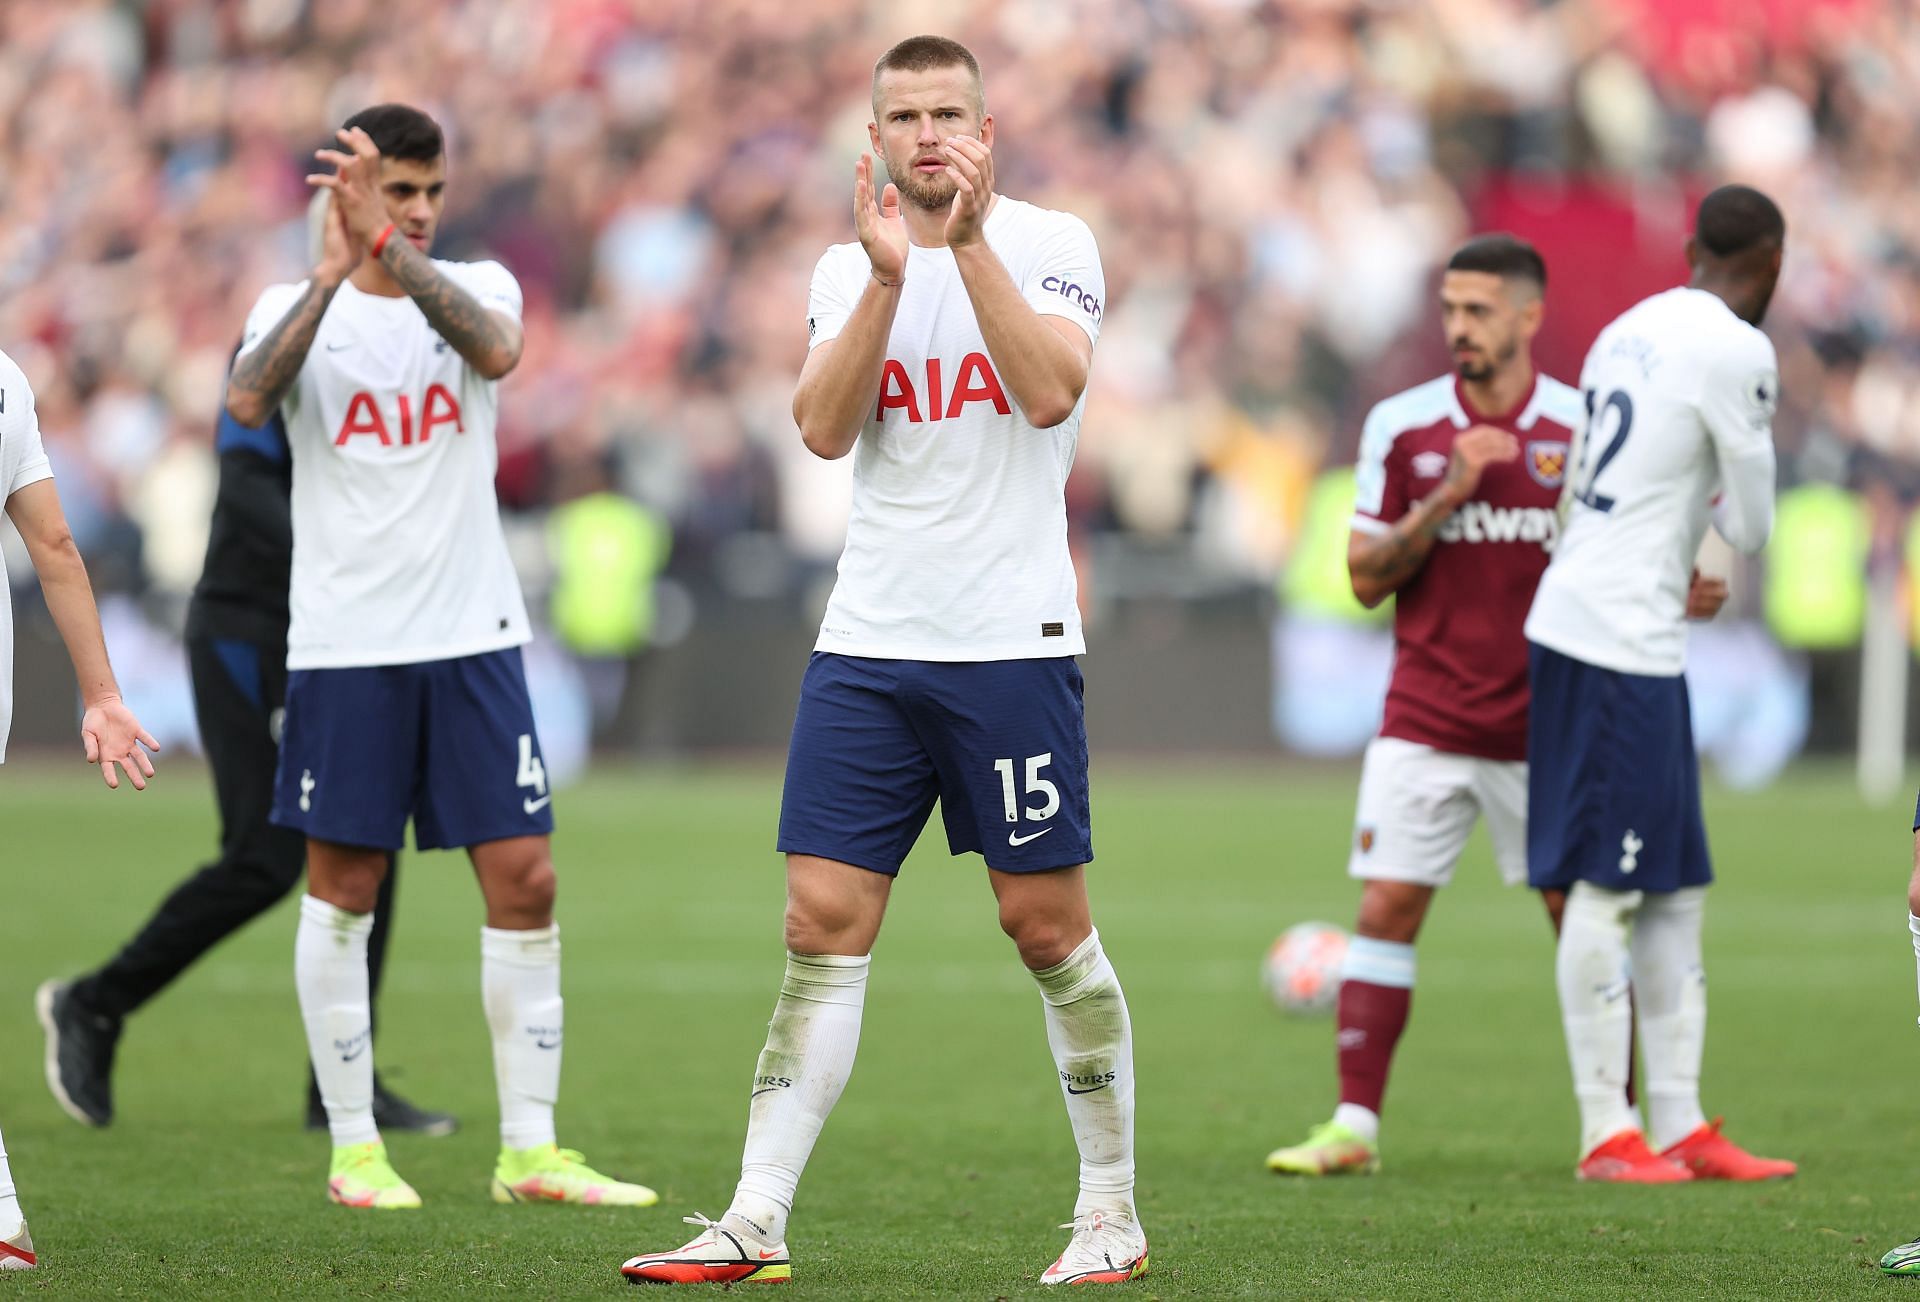 Tottenham will look to bounce back from their loss at the weekend